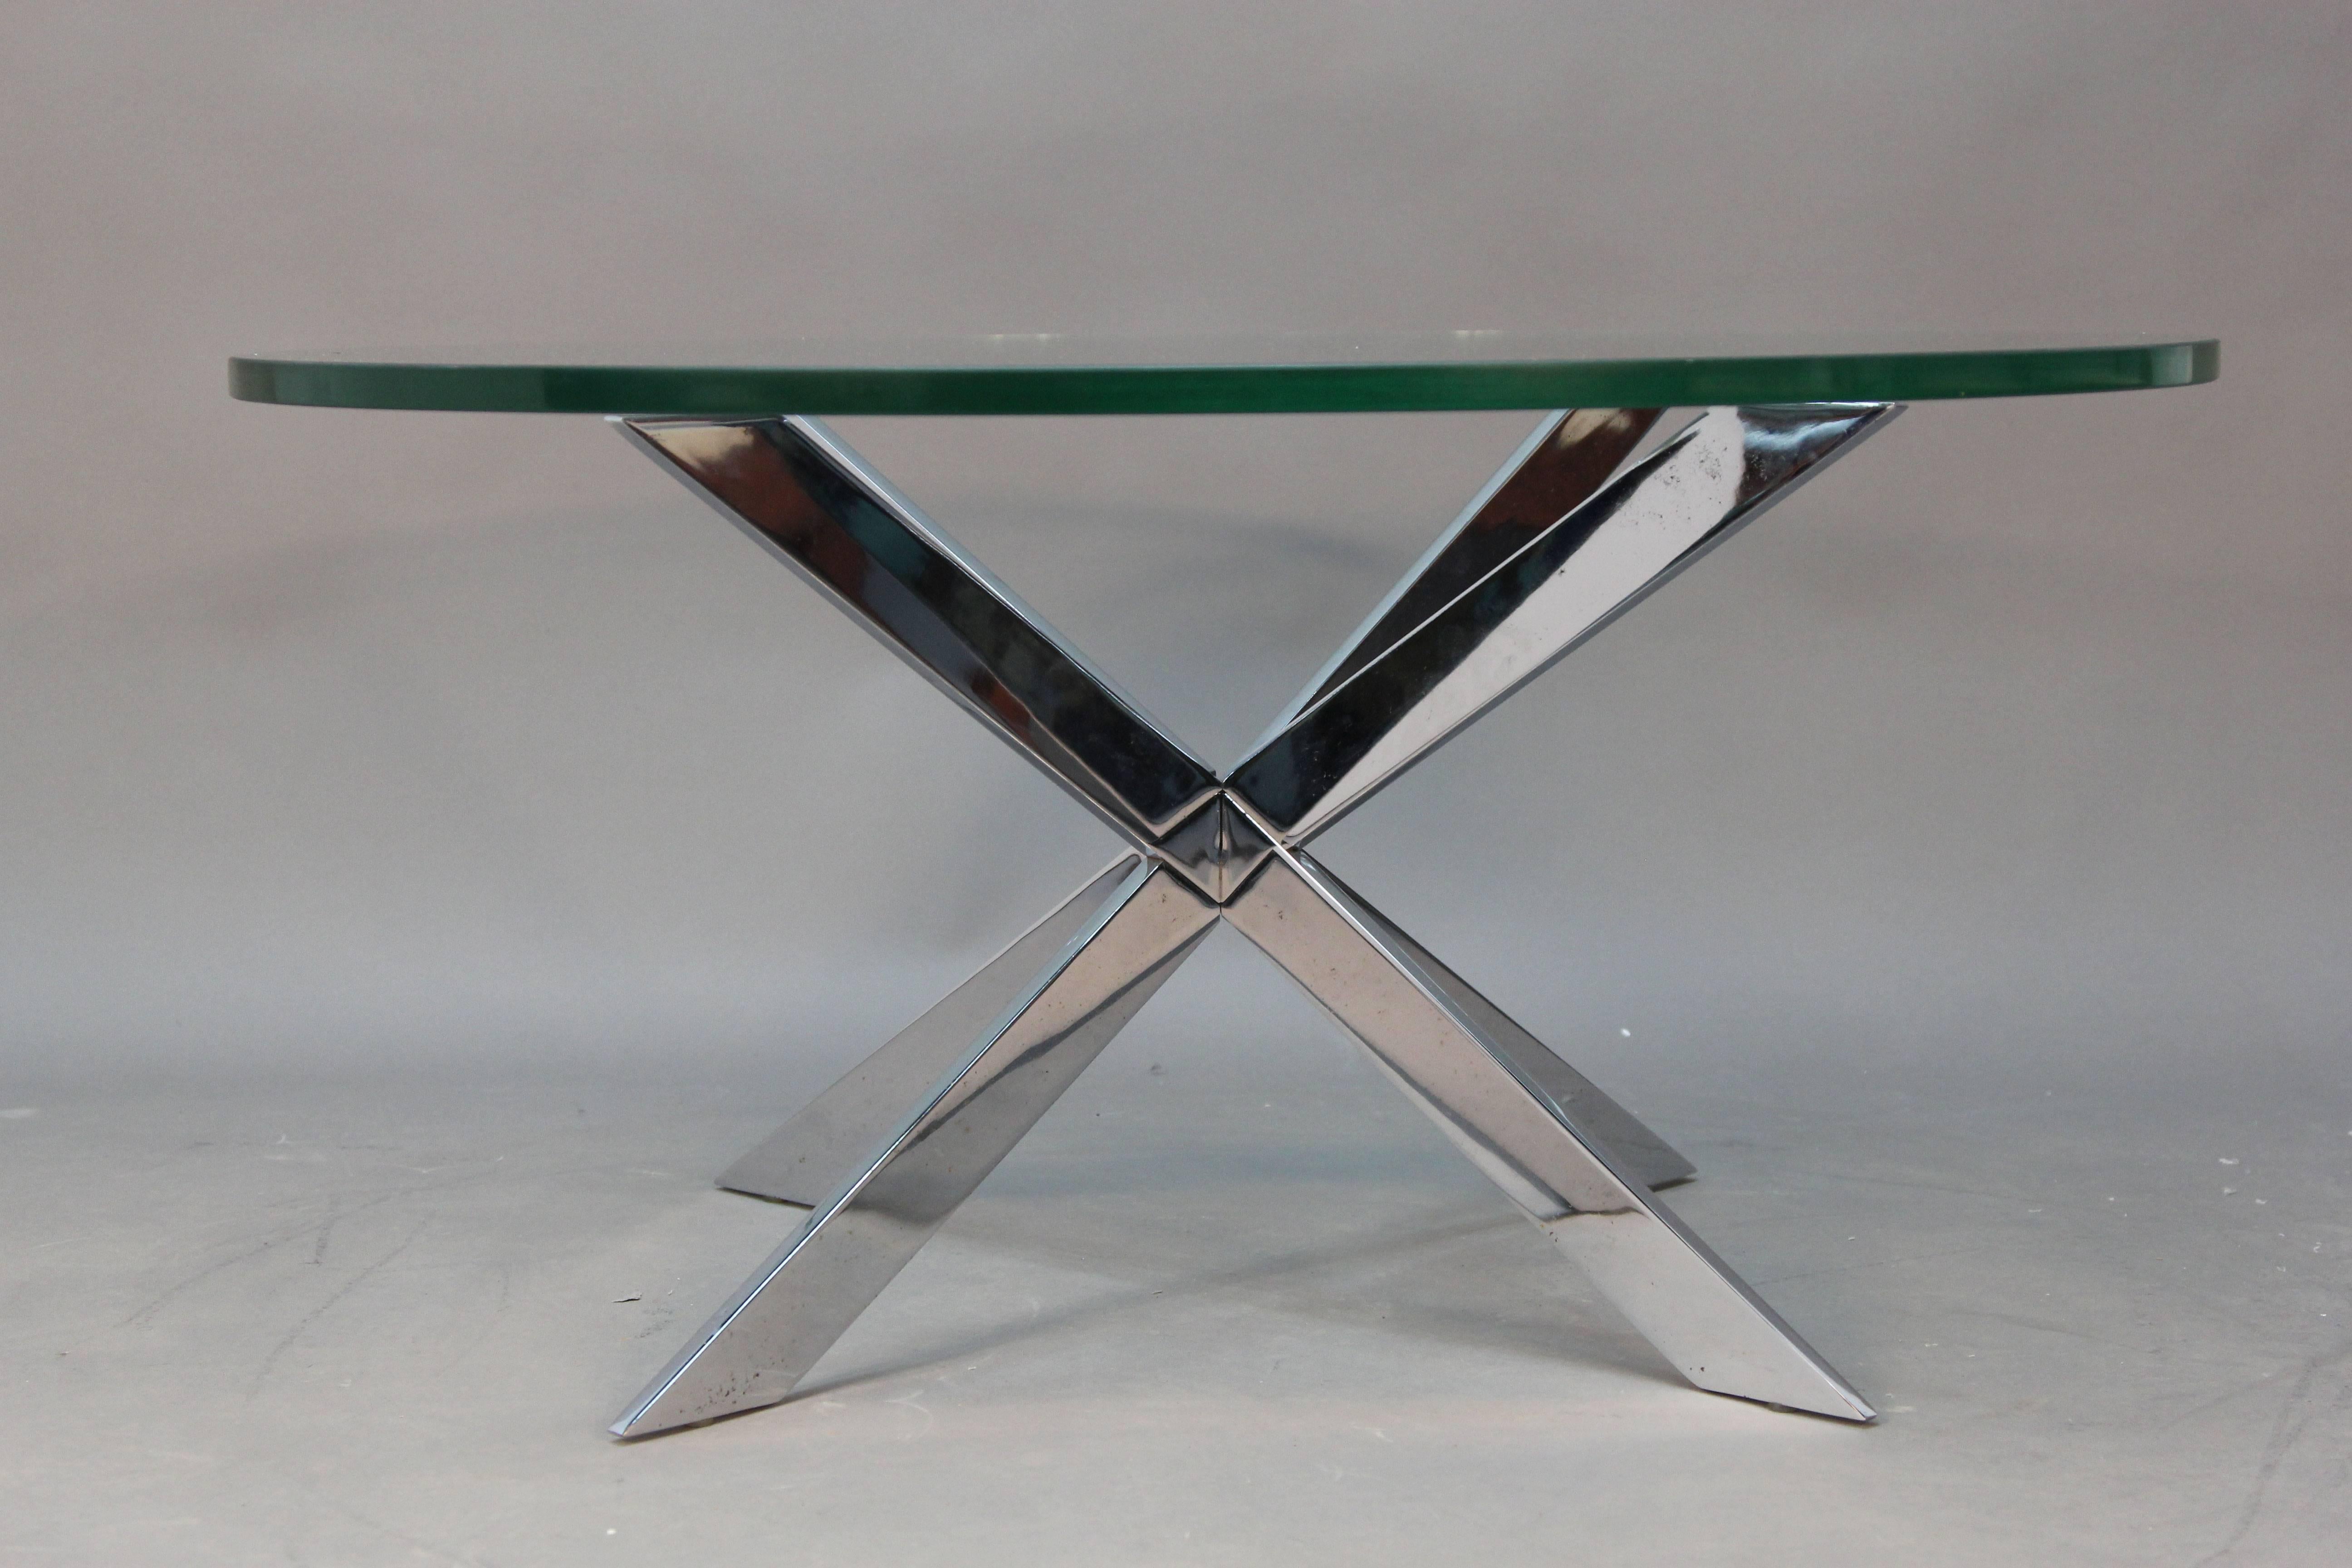 Available with clear or original smoked glass top, this chrome star base coffee table was designed by Leon Rosen for Pace Collection. Incredible style and sleek lines.

The Pace Collection was a high-end contemporary furniture company in business